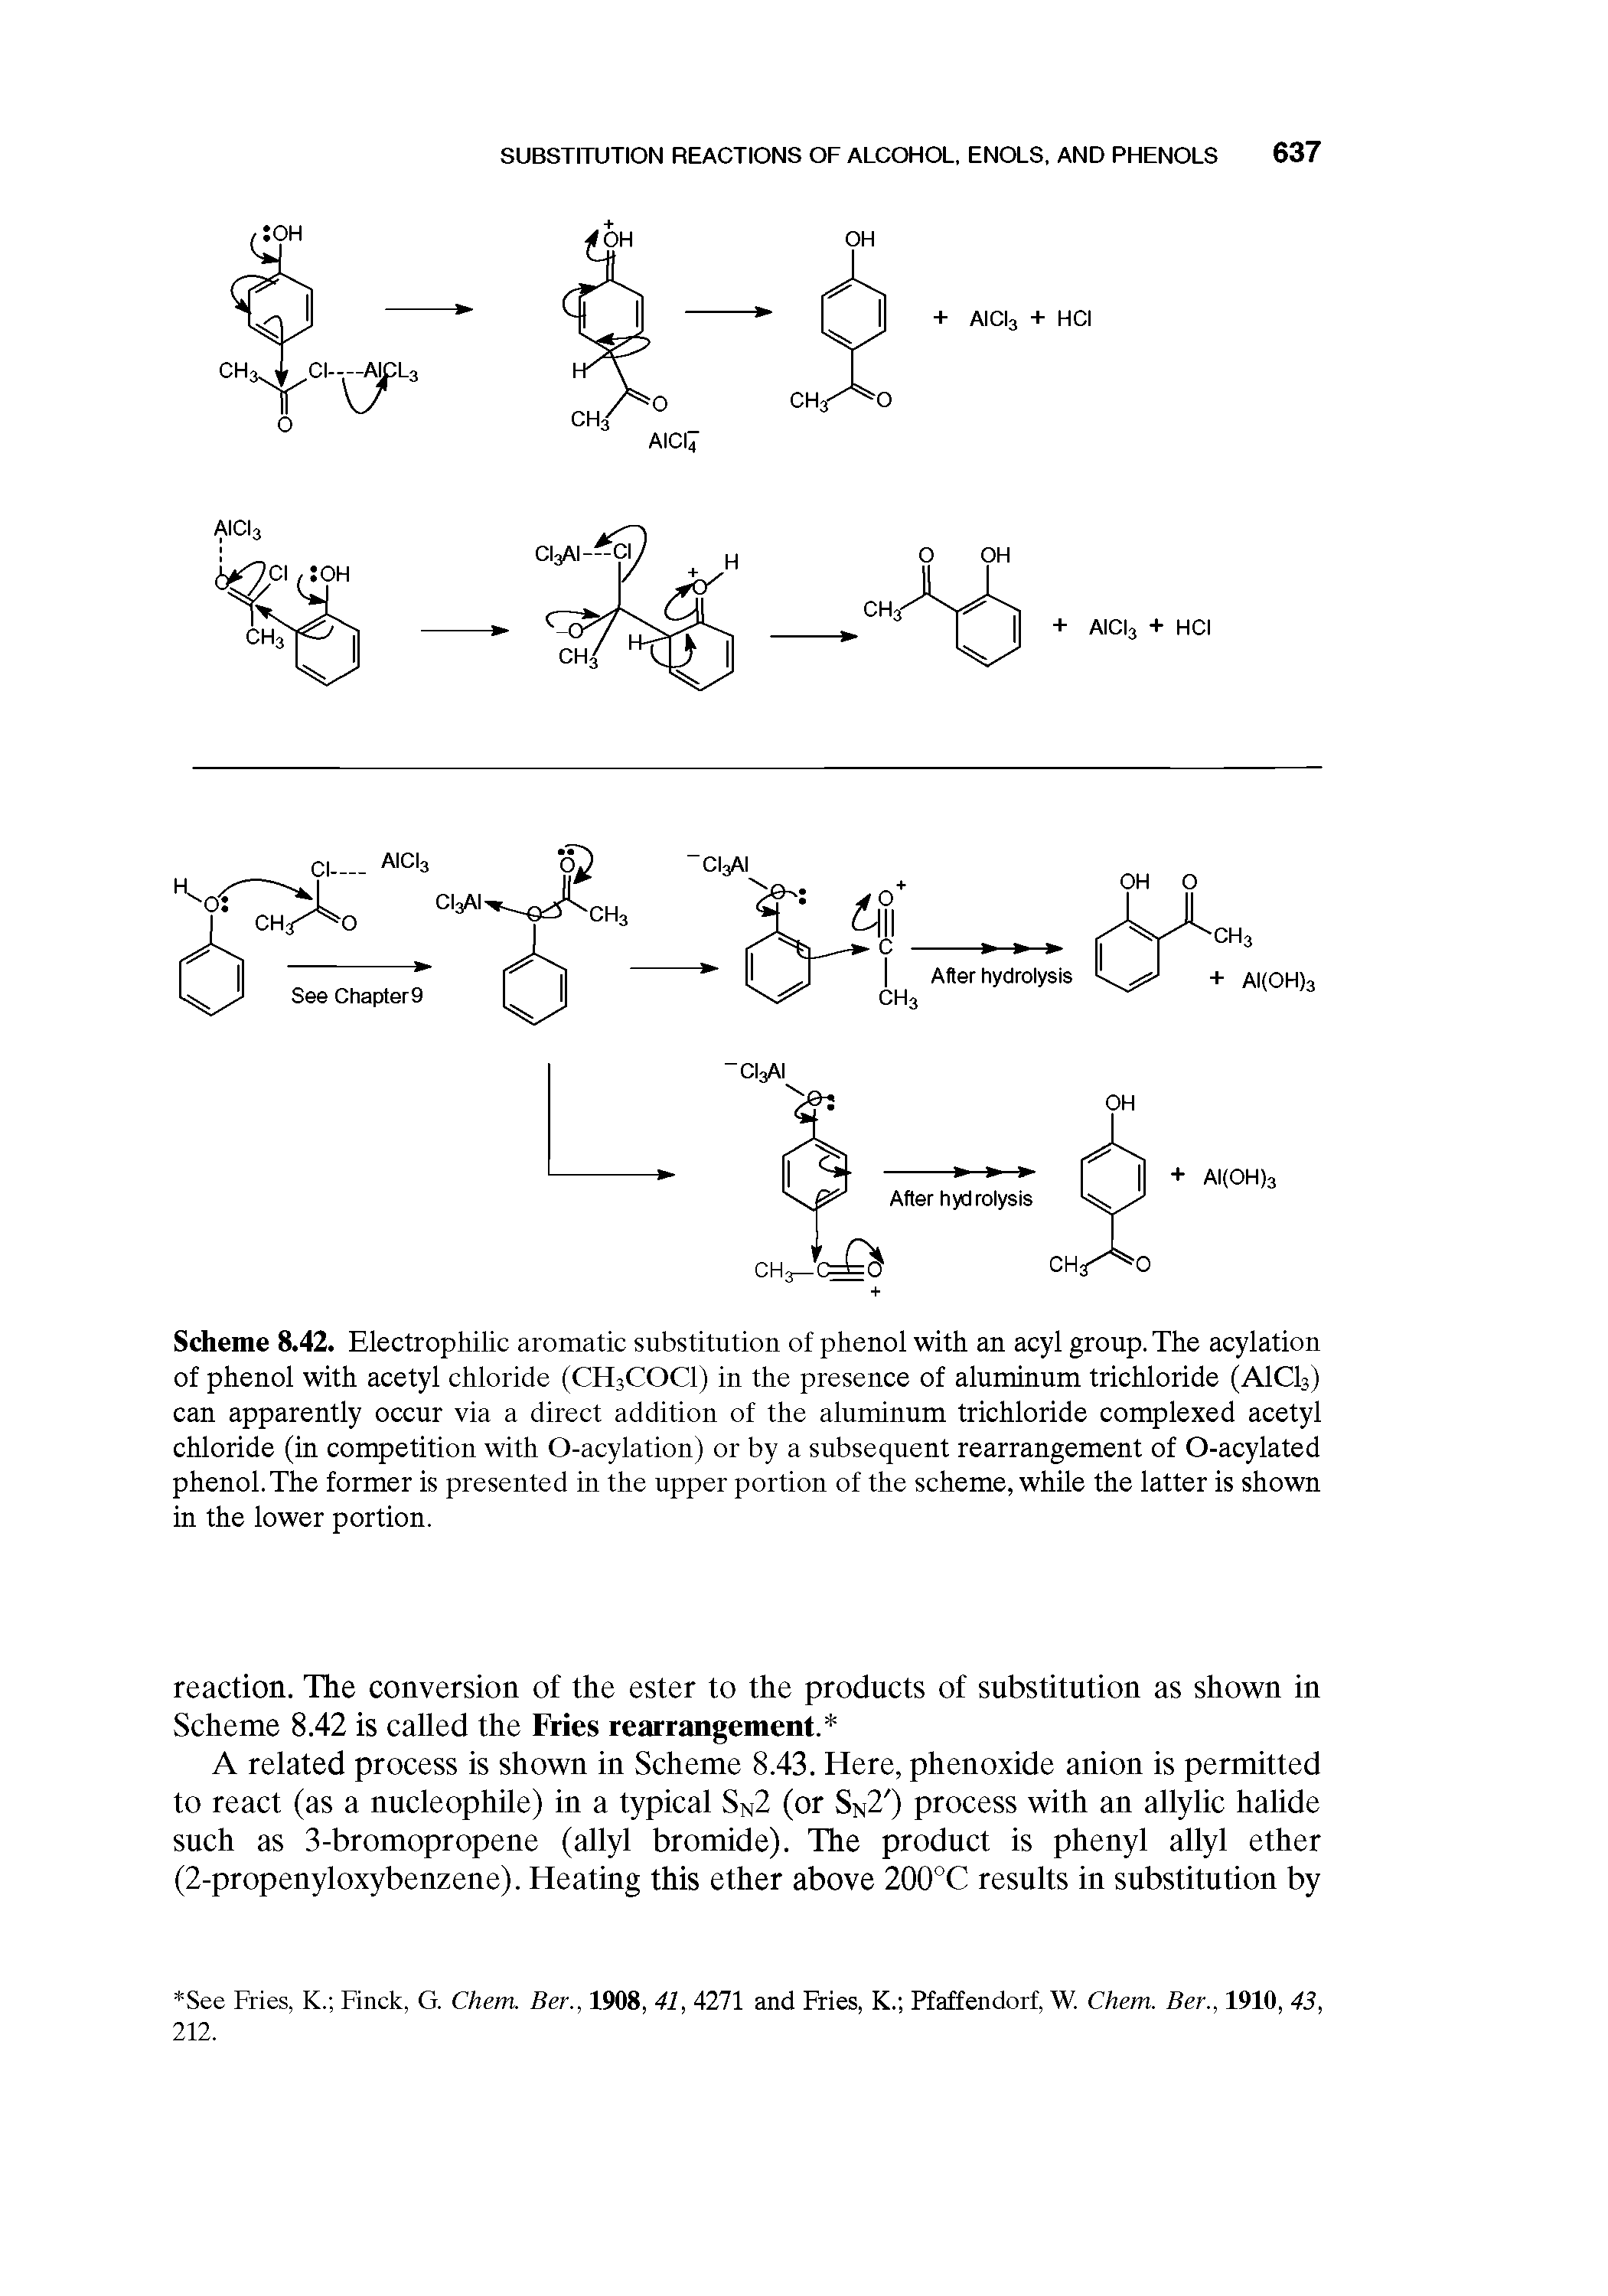 Scheme 8.42. Electrophilic aromatic substitution of phenol with an acyl group. The acylation of phenol with acetyl chloride (CH3COCI) in the presence of aluminum trichloride (AICI3) can apparently occur via a direct addition of the aluminum trichloride complexed acetyl chloride (in competition with O-acylation) or by a subsequent rearrangement of O-acylated phenol. The former is presented in the upper portion of the scheme, while the latter is shown in the lower portion.